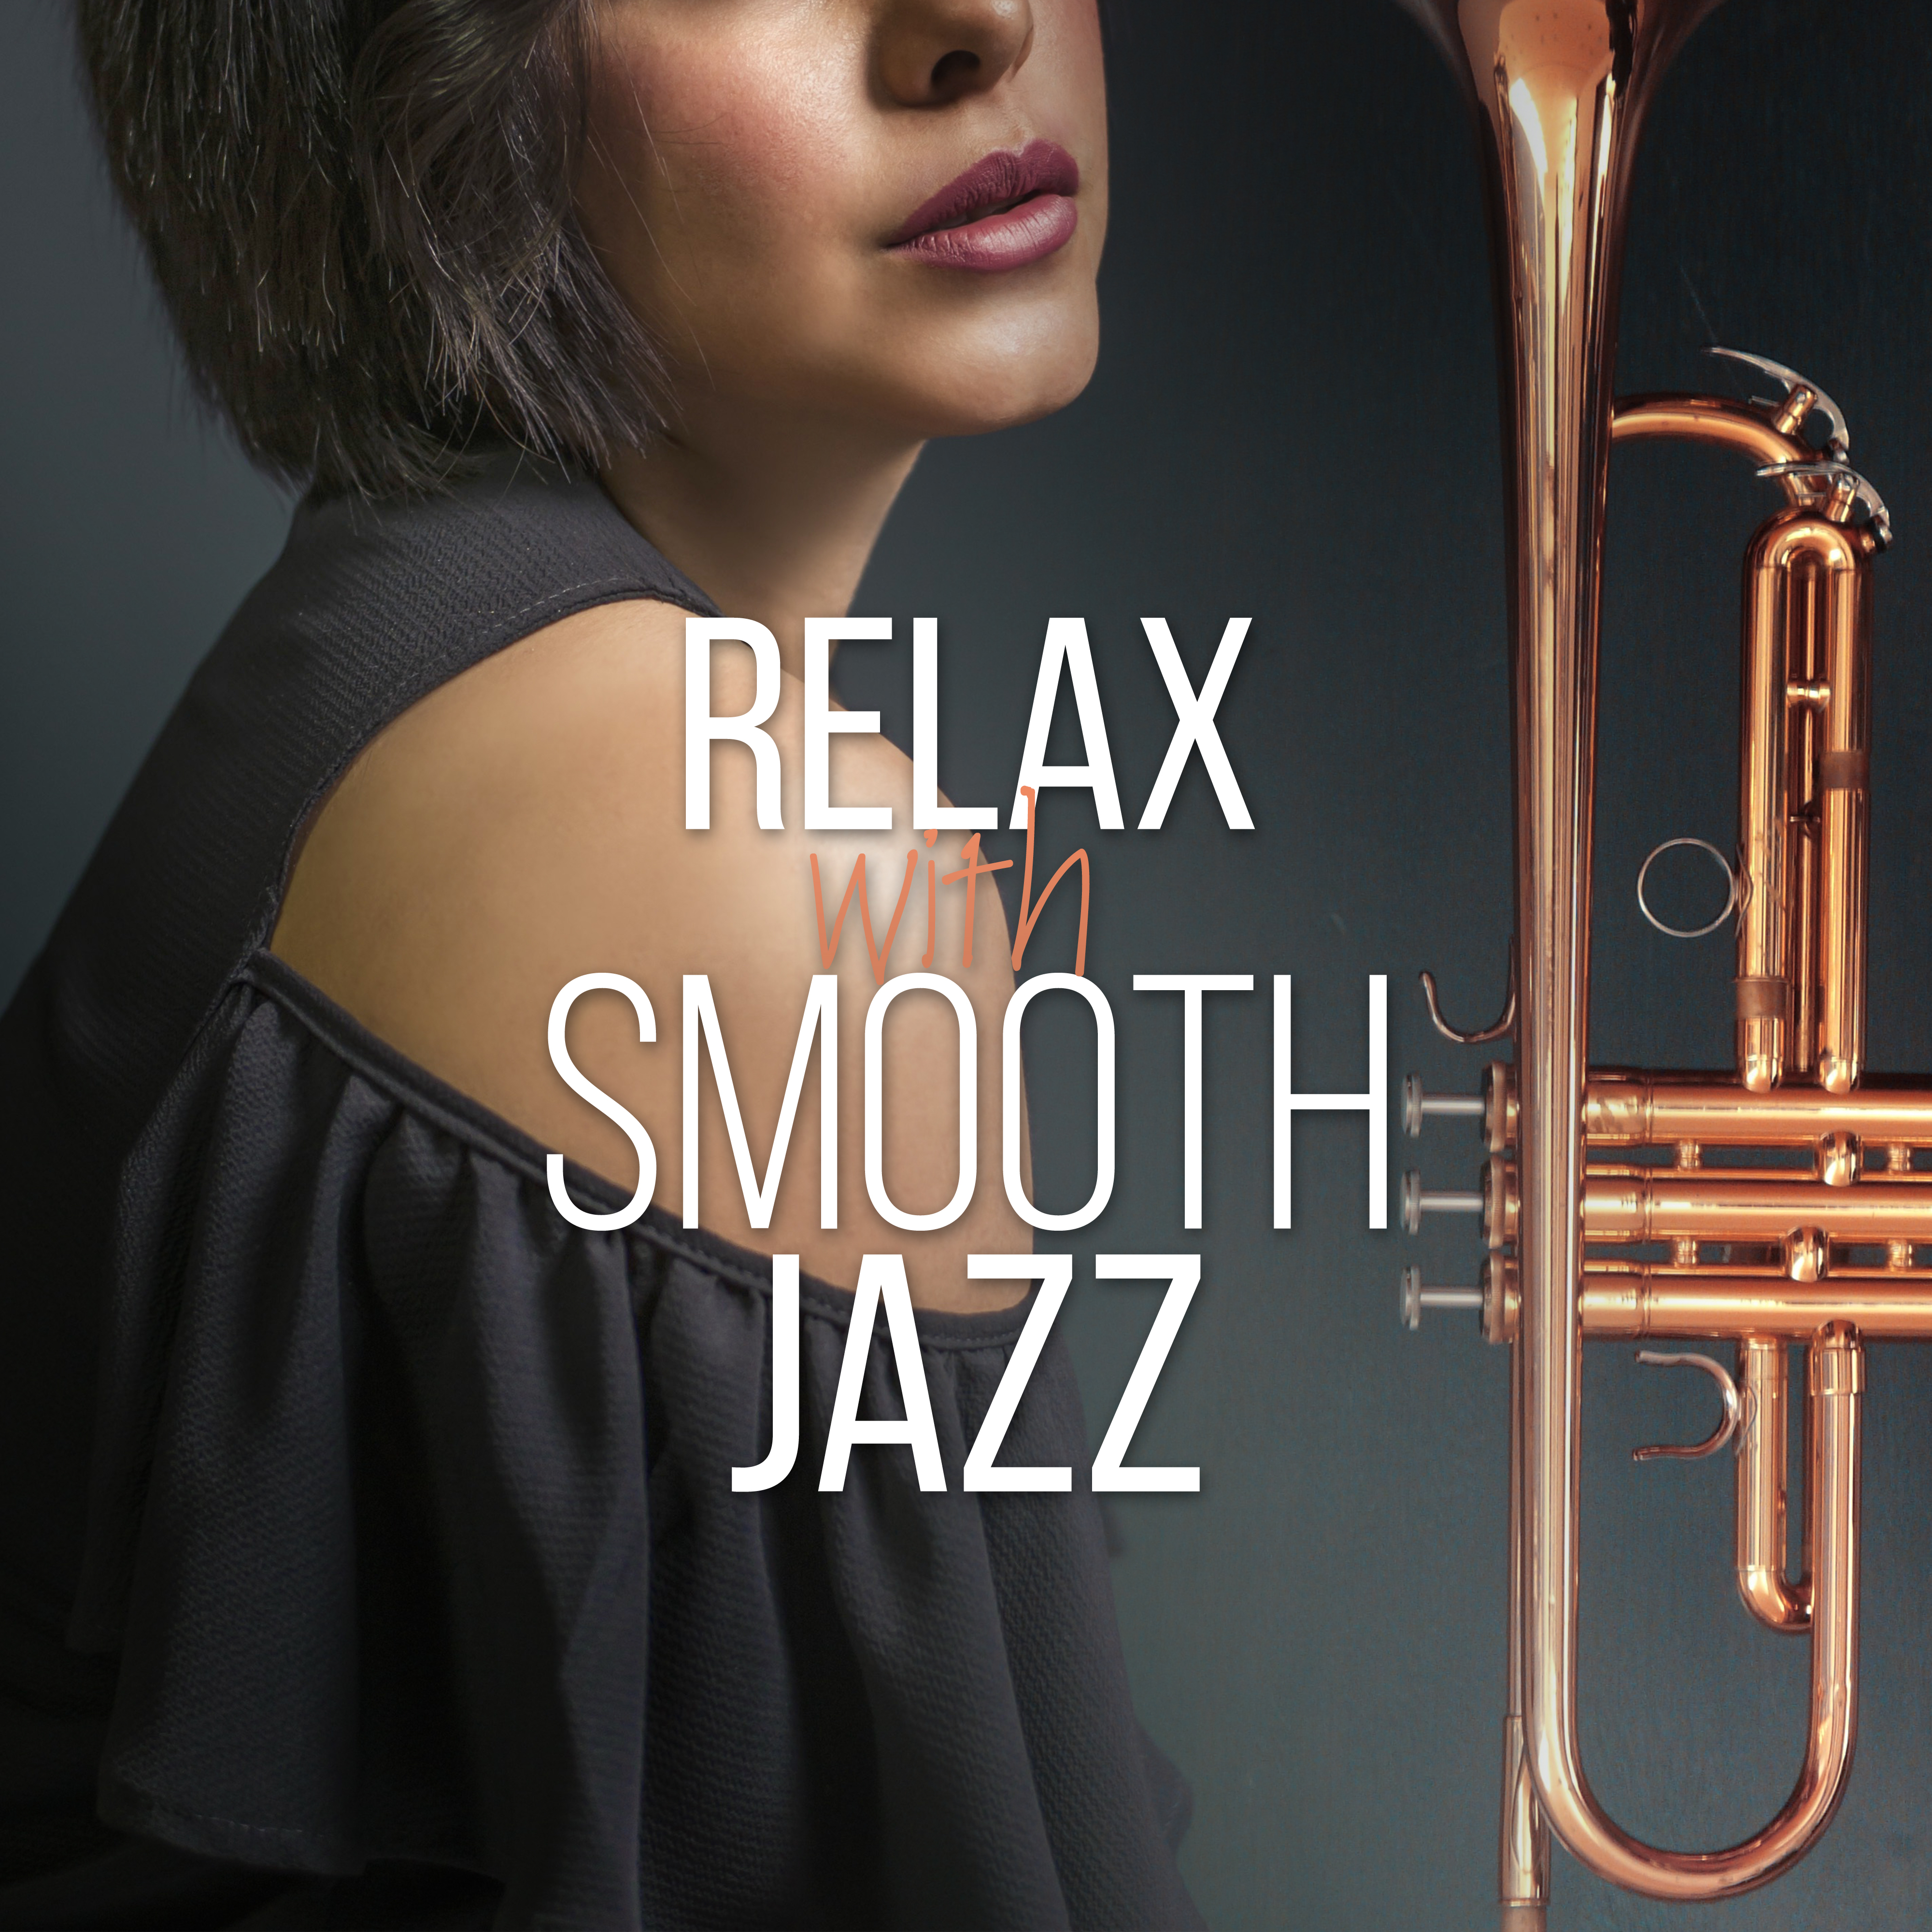 Relax with Smooth Jazz – Calm Down & Relax, Peaceful Jazz Sounds, Easy Listening